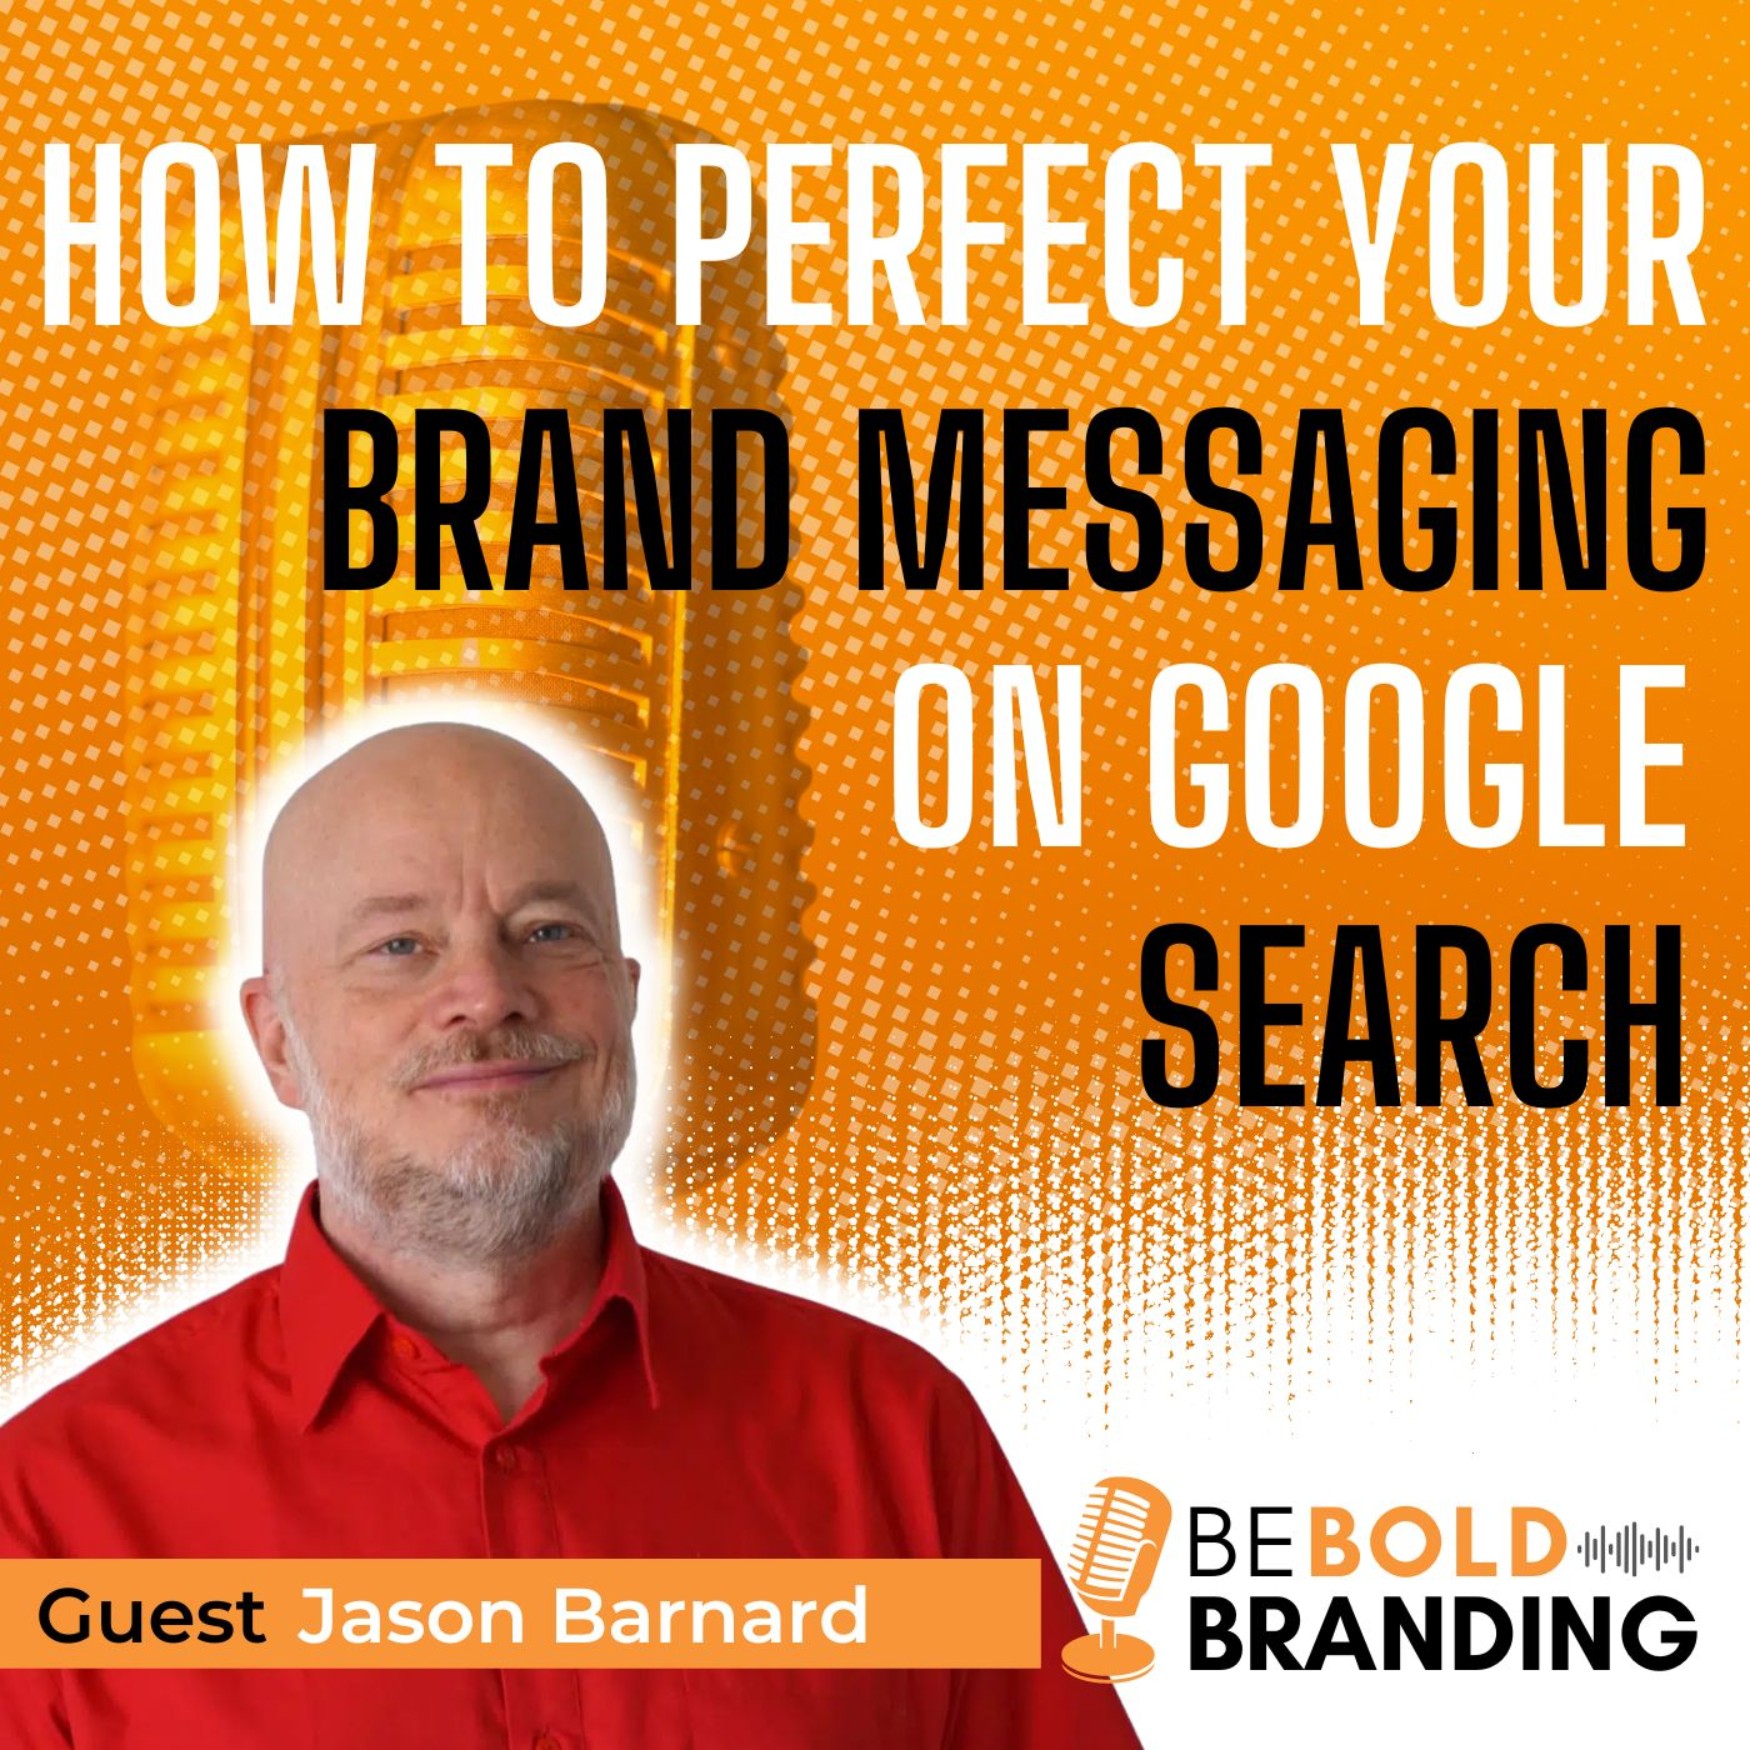 How To Perfect Your Brand Messaging on Google Search